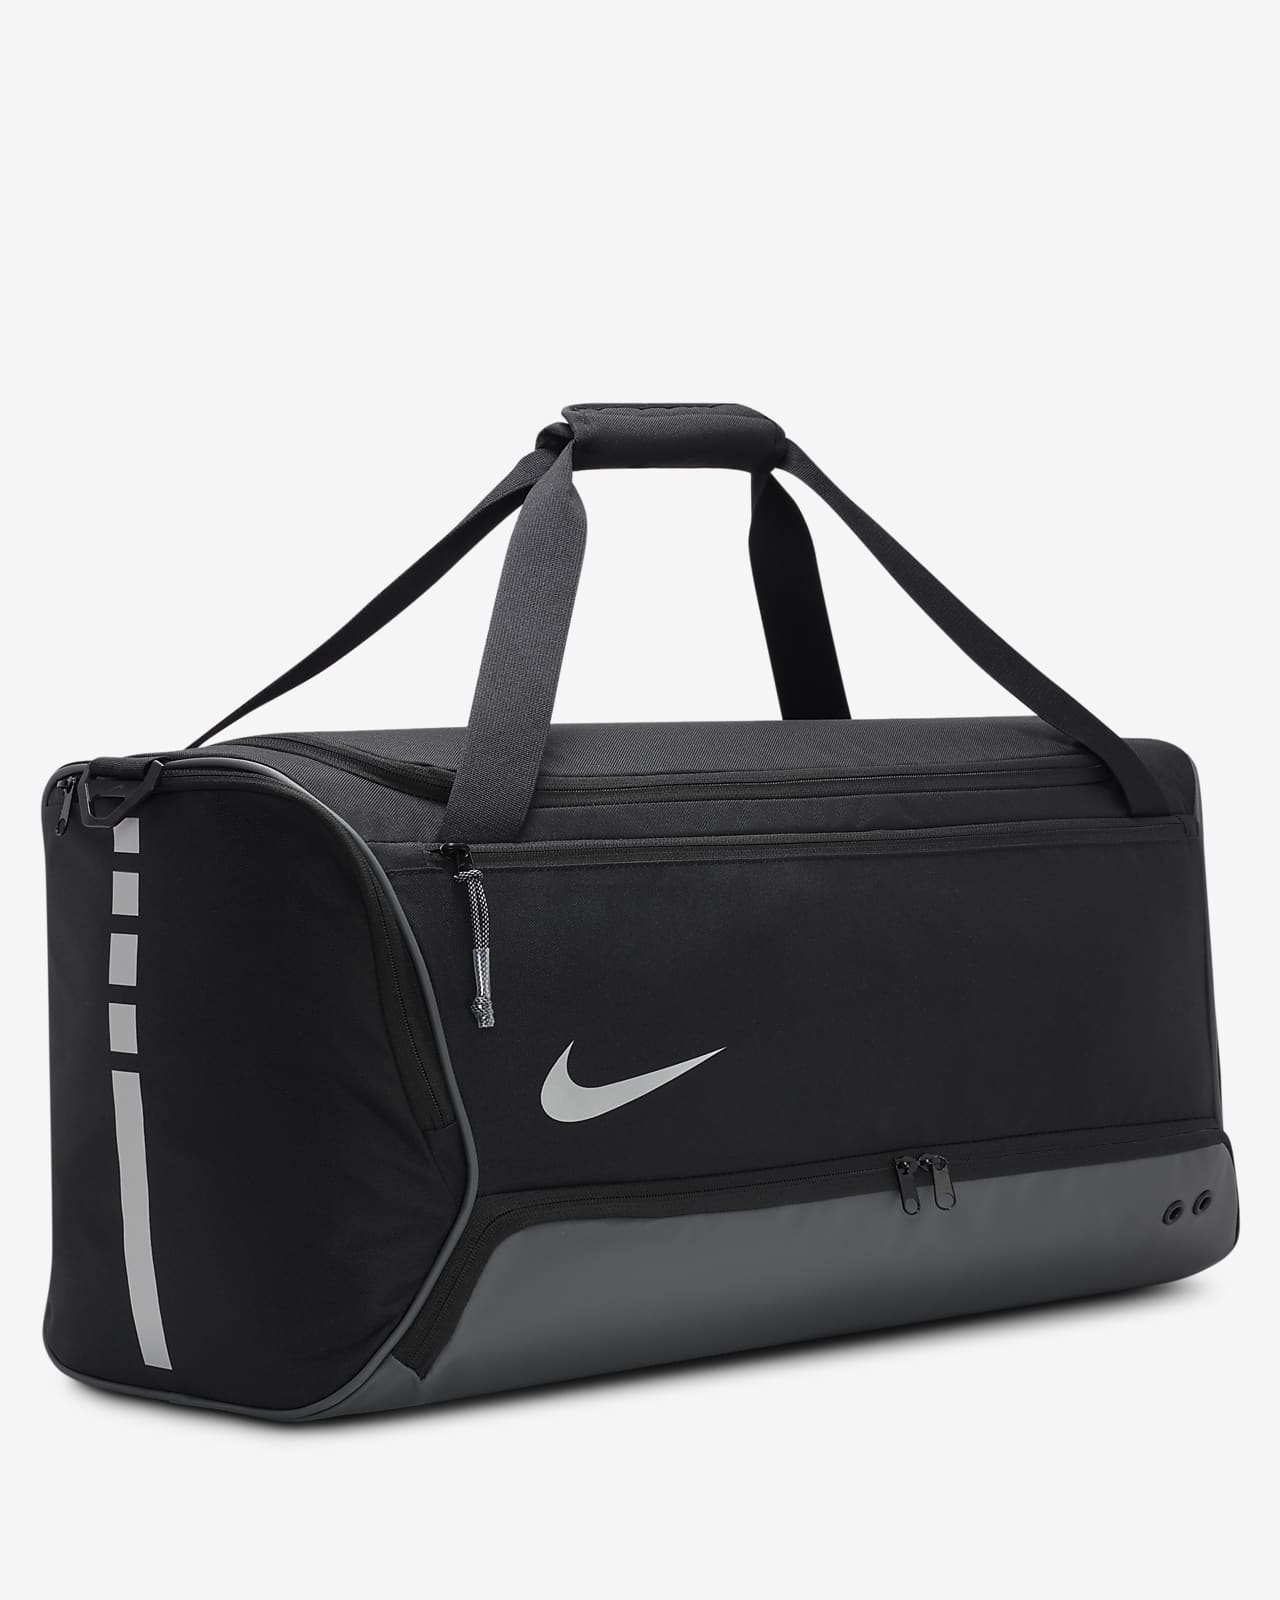 SIDDHASWARI (Expandable) 30 L CASUAL LEATHER DUFFLE BAGS FOR TRAVEL - Black  - Regular Capacity Duffel Without Wheels BLACK - Price in India |  Flipkart.com